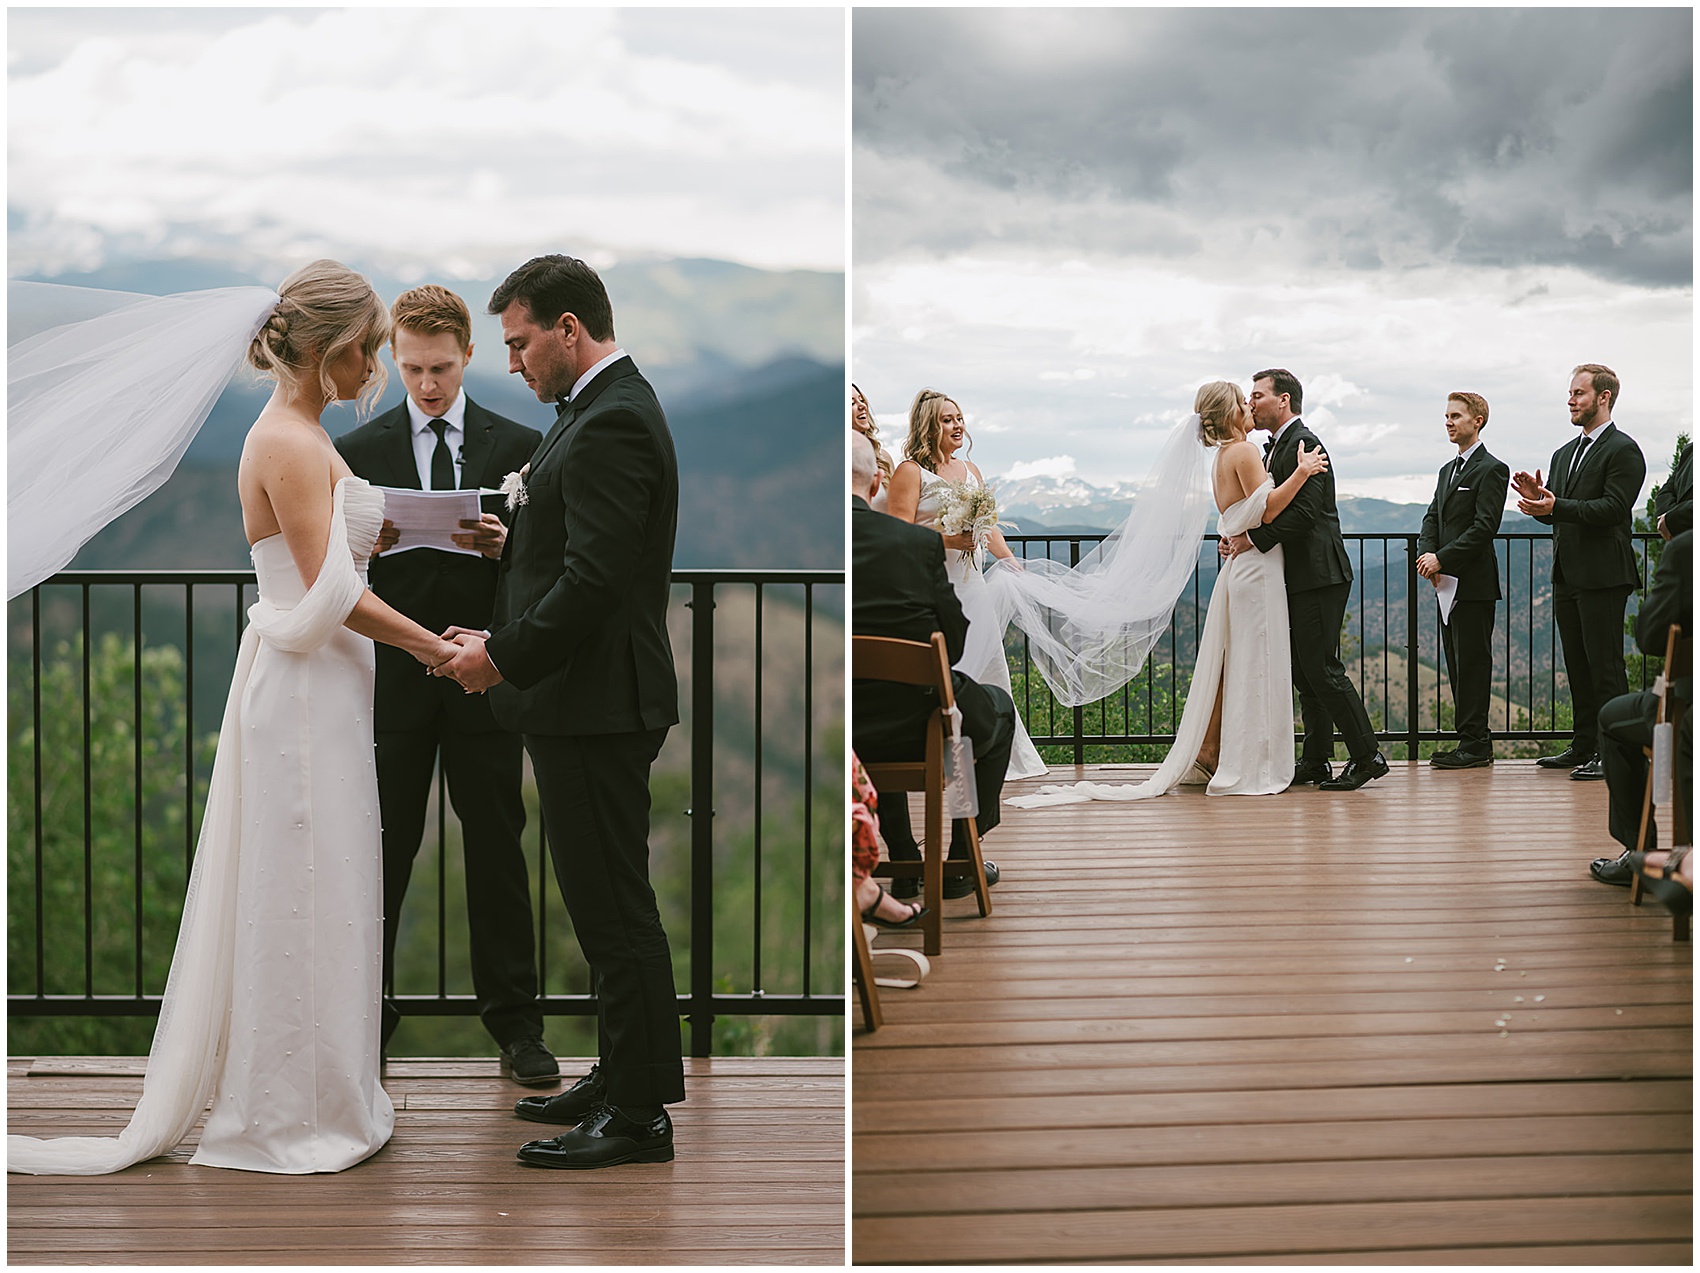 Newlyweds kiss to finish their wedding on an outdoor deck overlooking the mountains